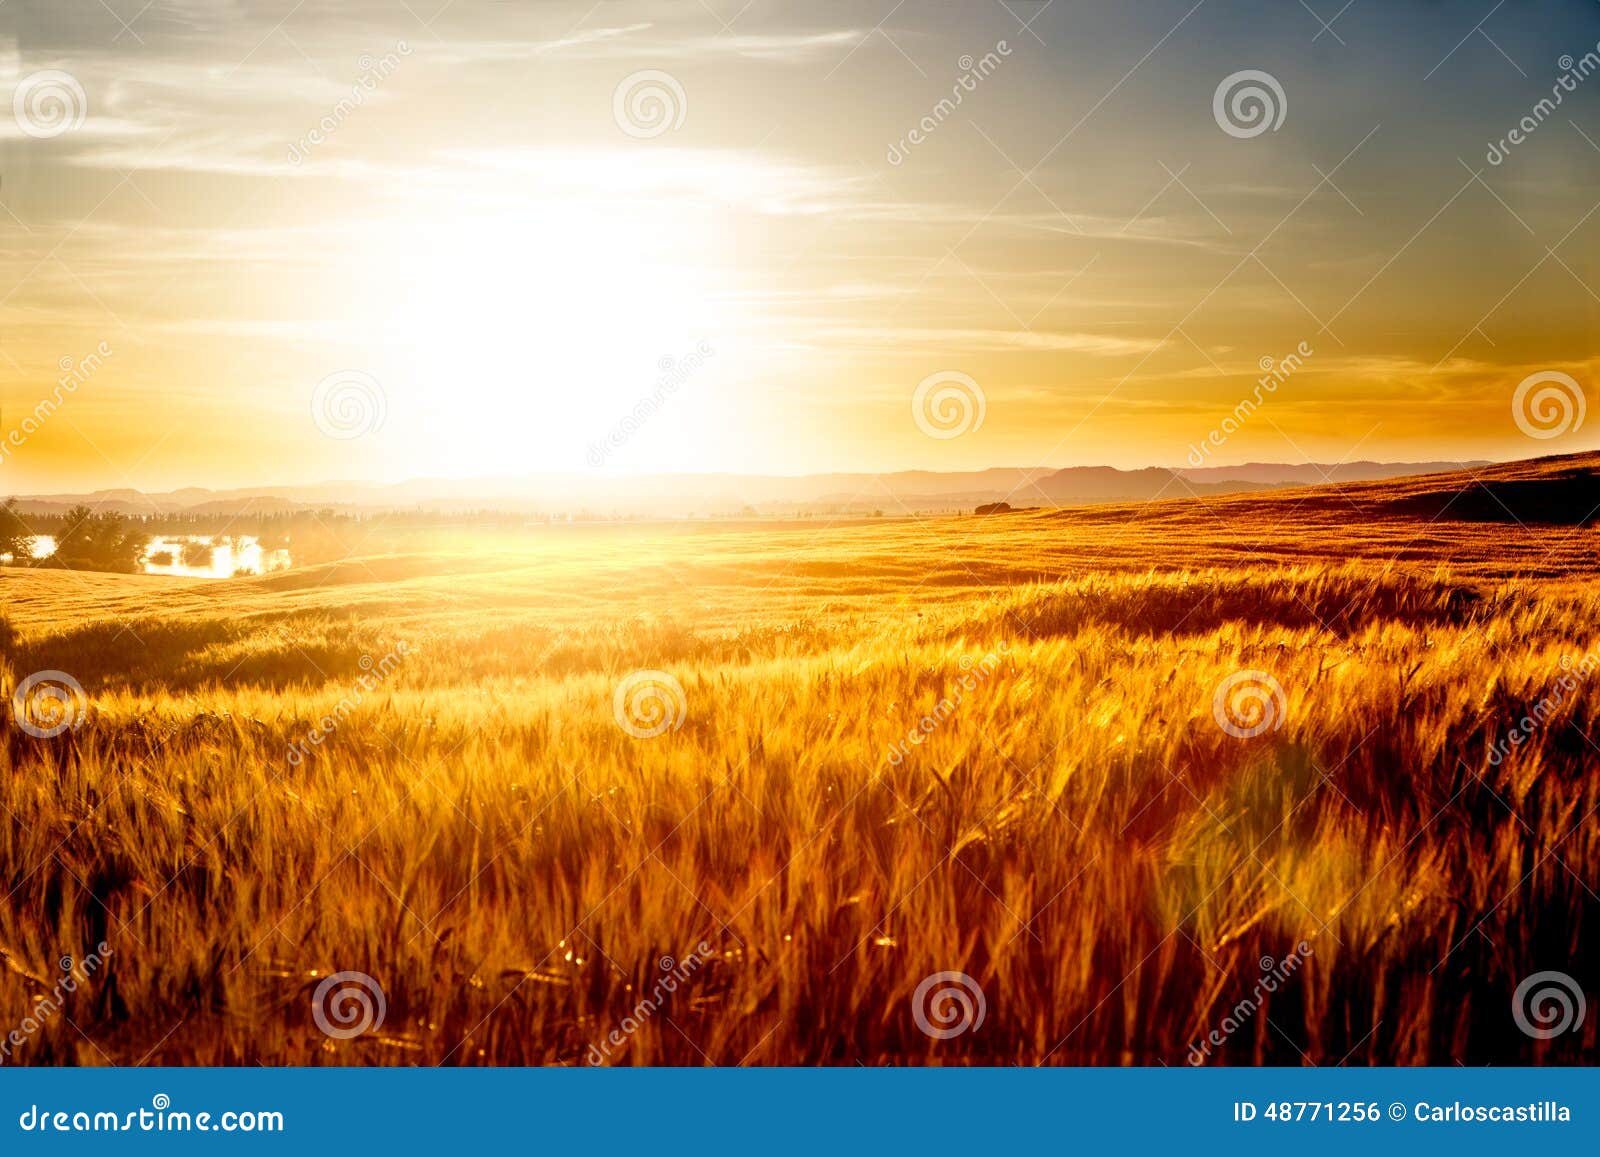 wheat fields and sunset landscape.